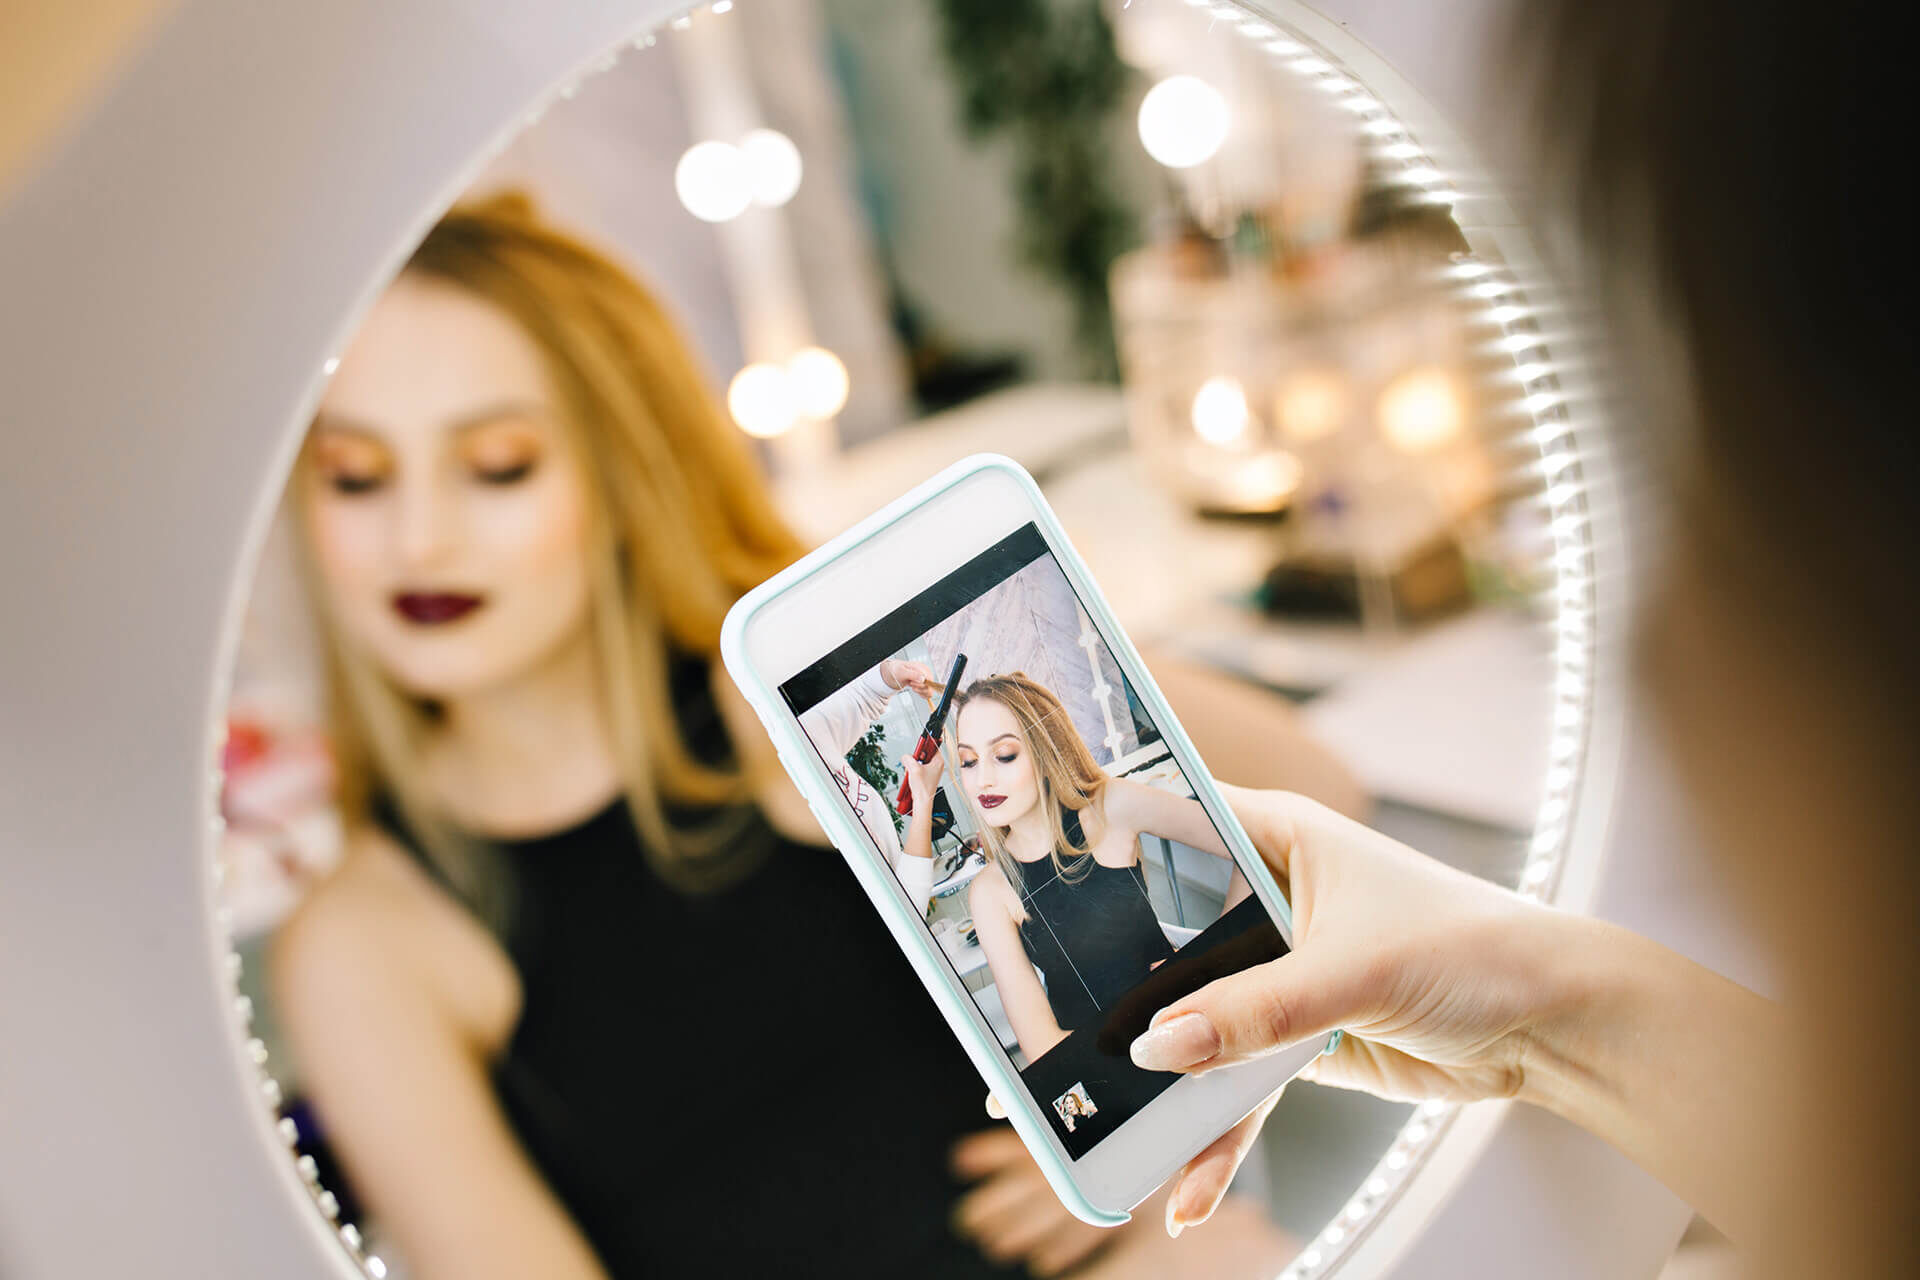 elegant-pretty-young-woman-making-photo-phone-mirror-during-making-hairstyle-hairdresser-salon-stylish-fashionable-model-preparing-party-celebration-luxury-look